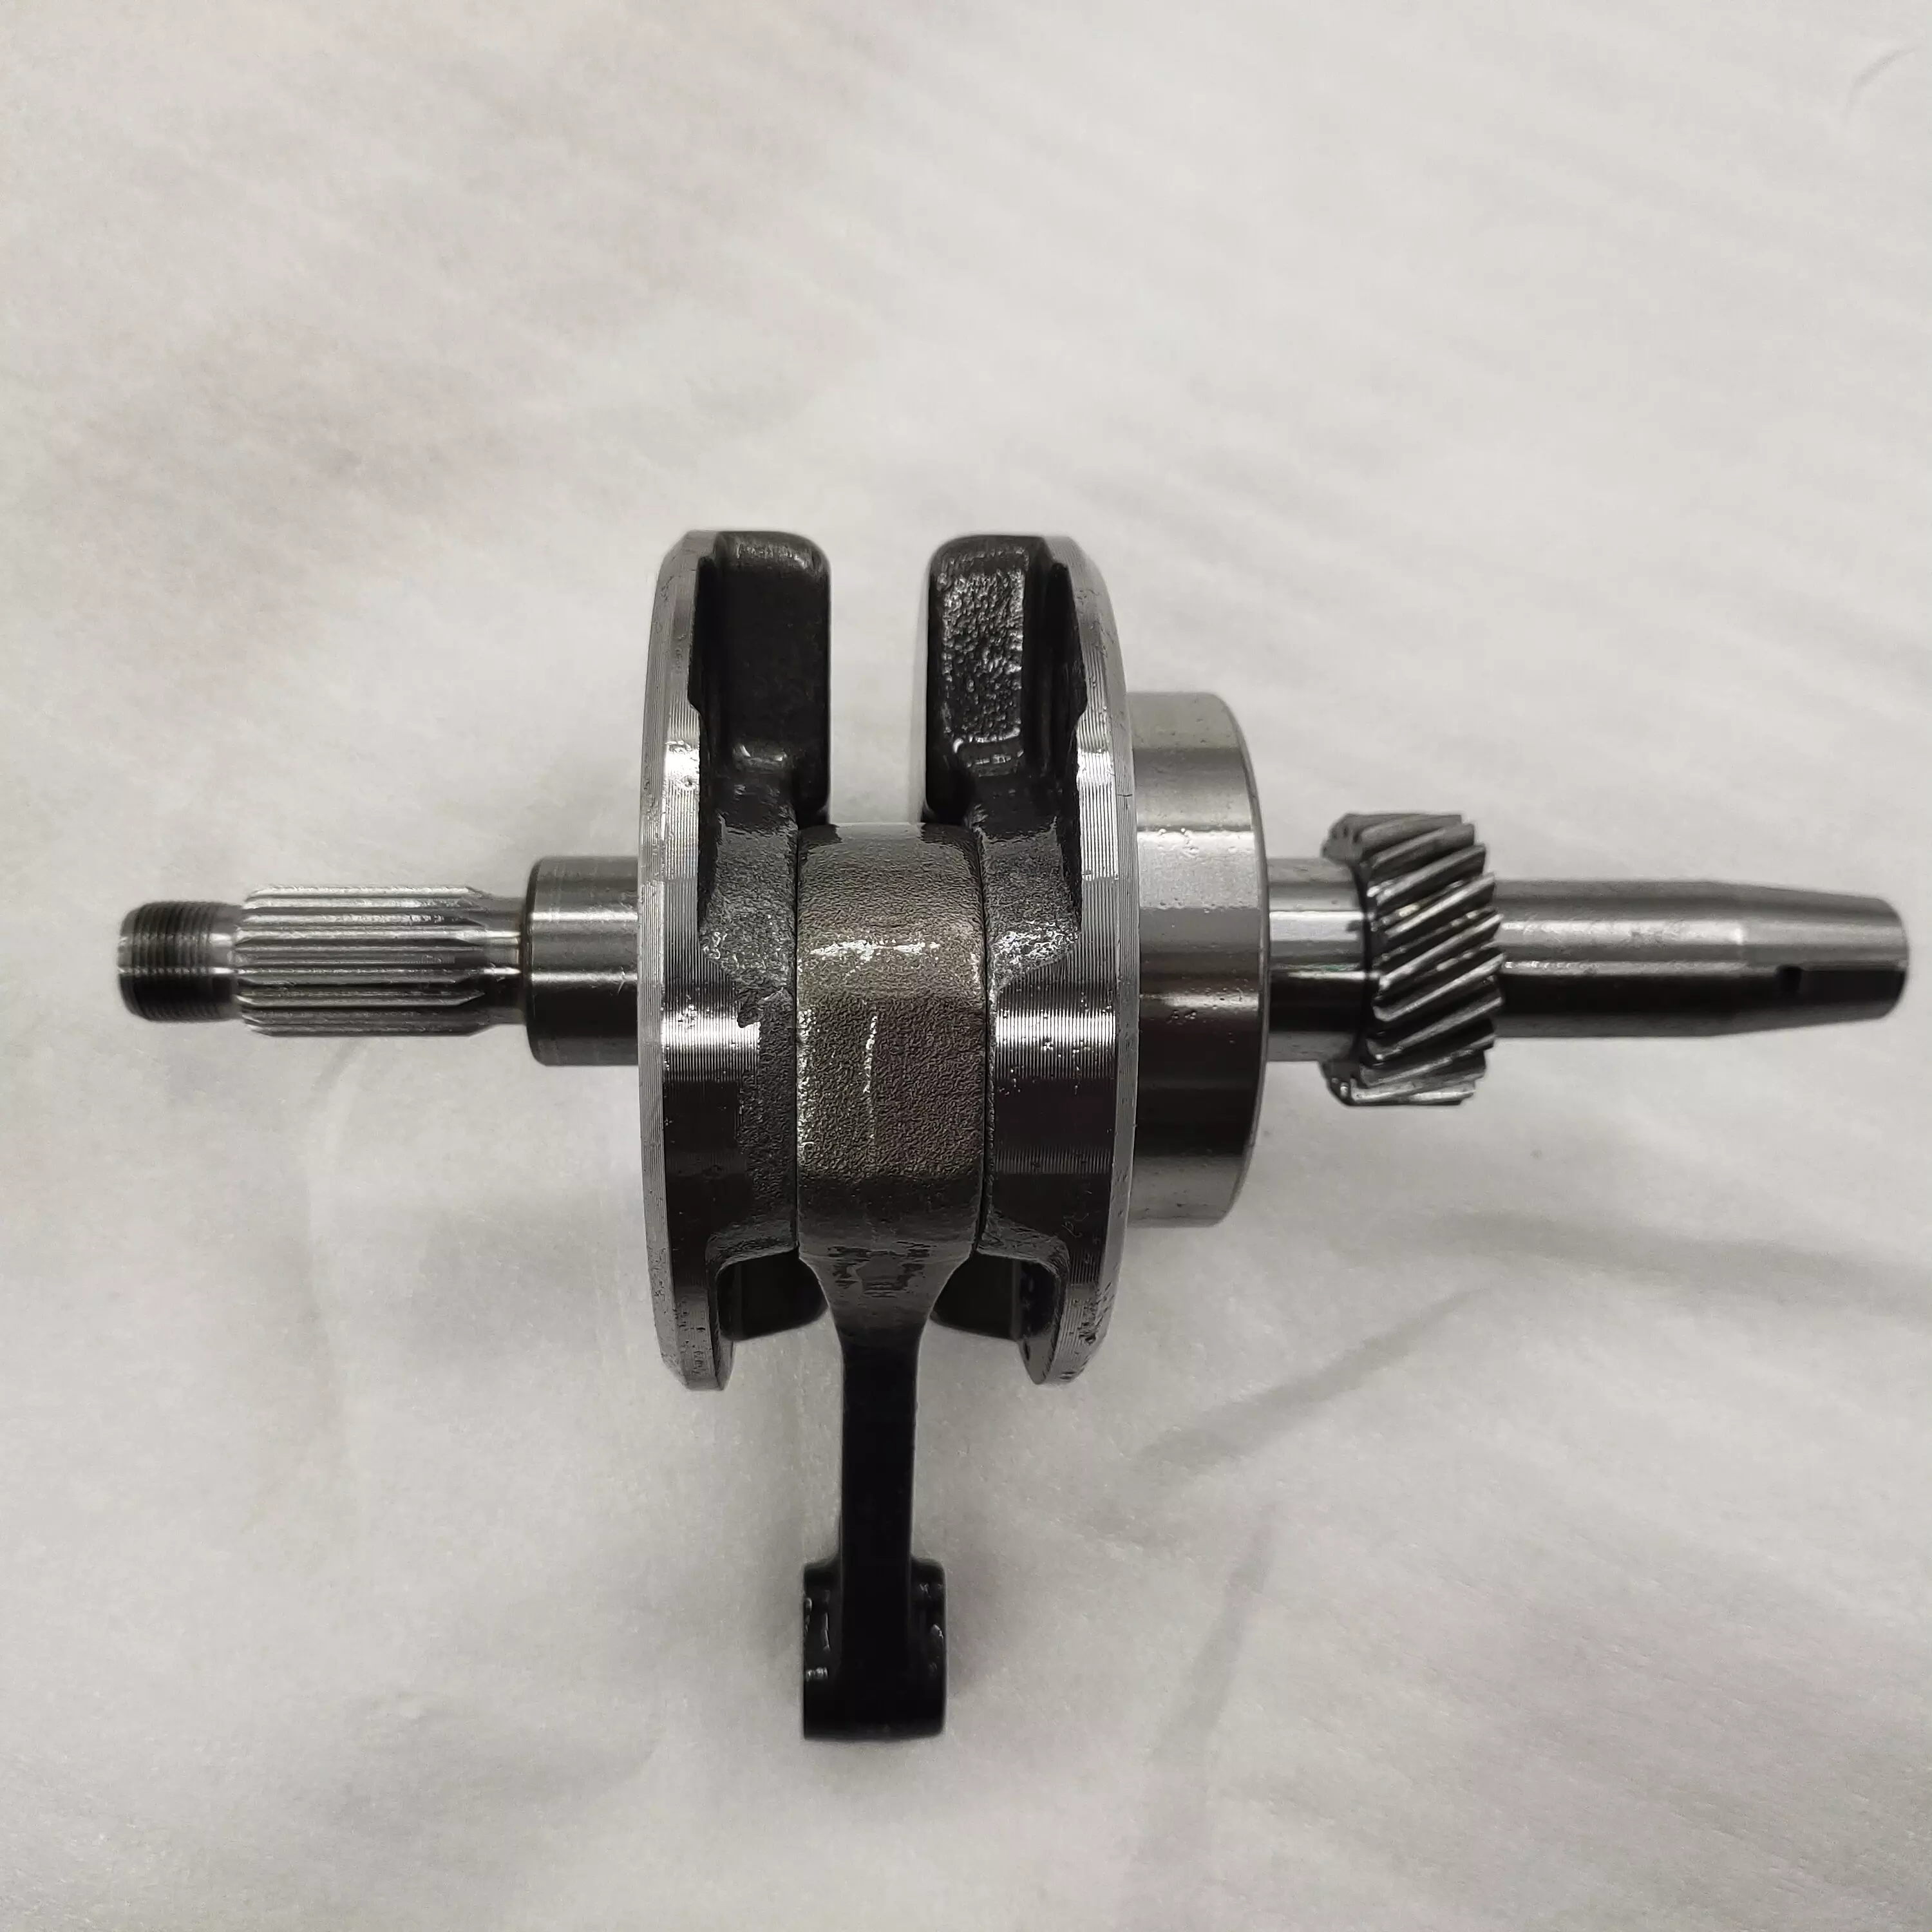 Performance Engine Parts Forged Steel Motorcycle Crankshaft For DAYANG Tricycle lifan 250cc engine